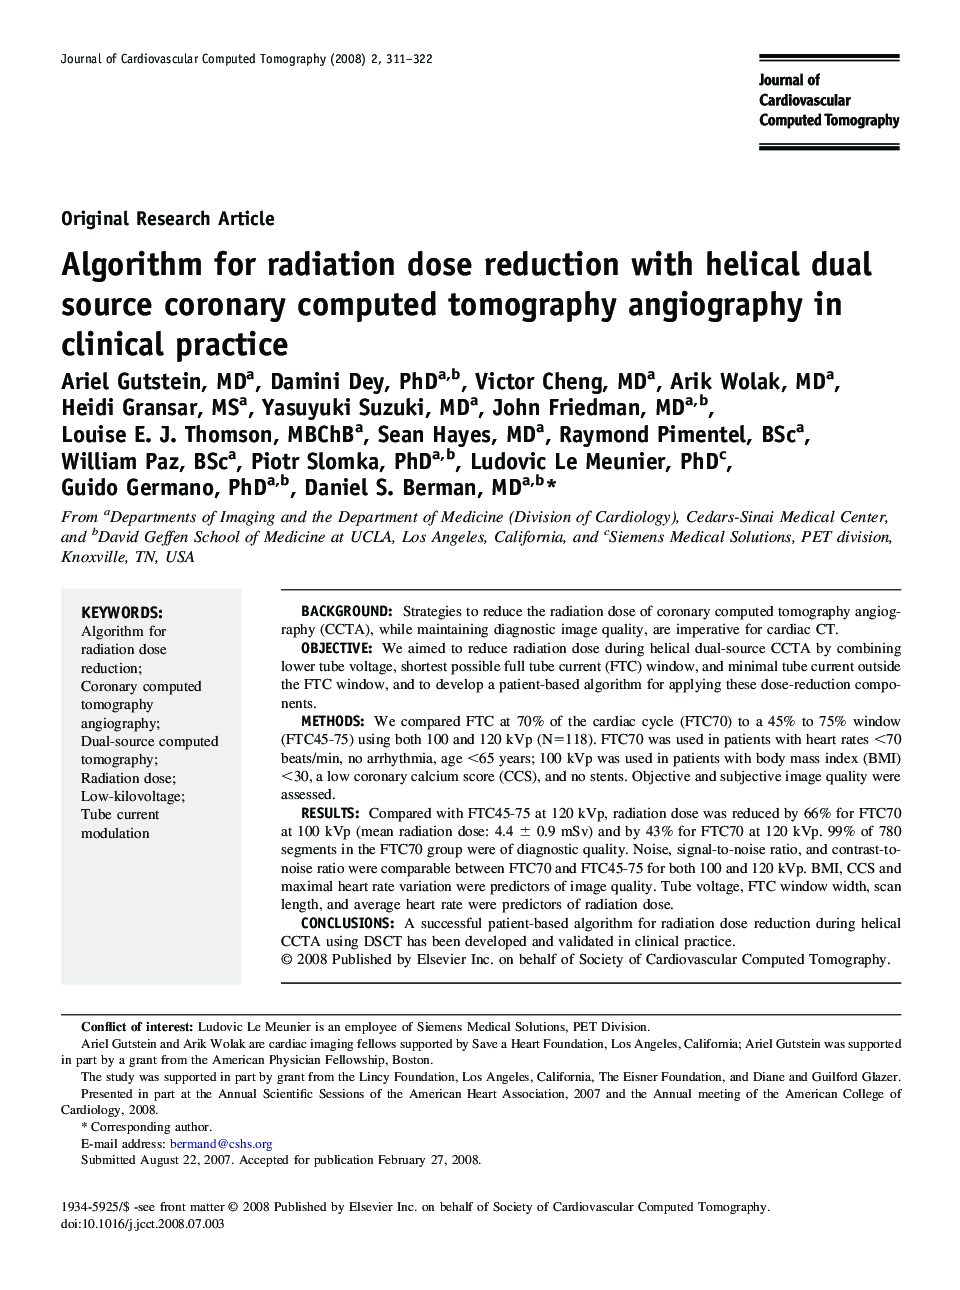 Algorithm for radiation dose reduction with helical dual source coronary computed tomography angiography in clinical practice 